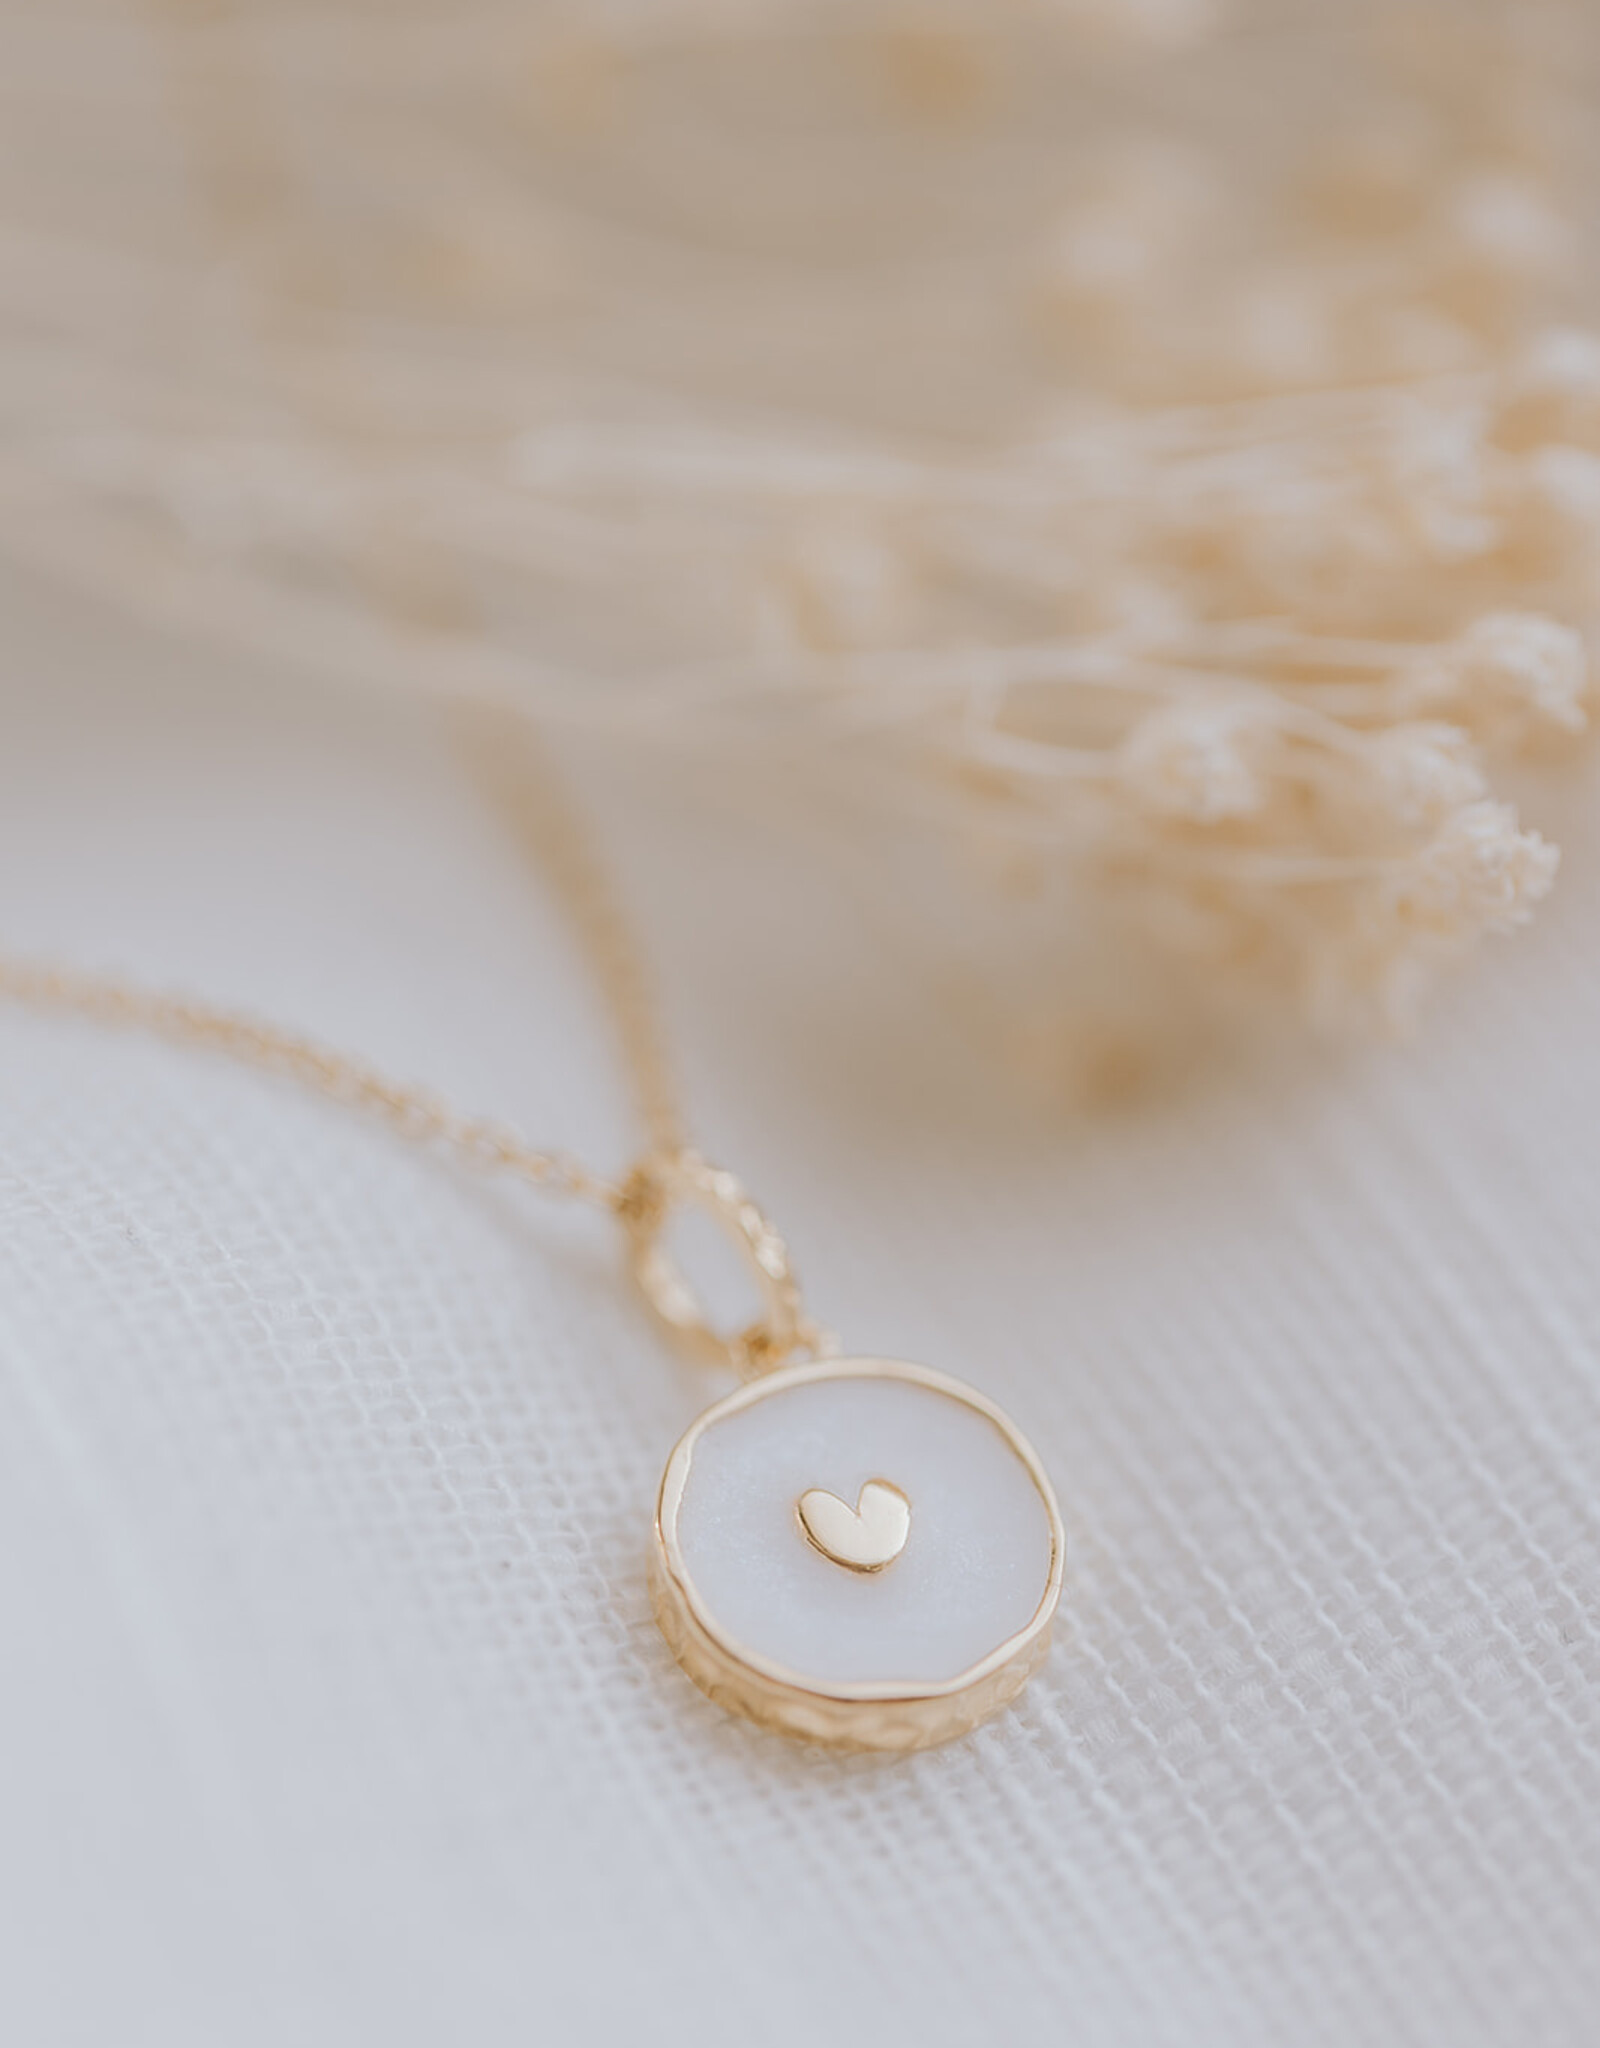 Breastmilk necklace with heart